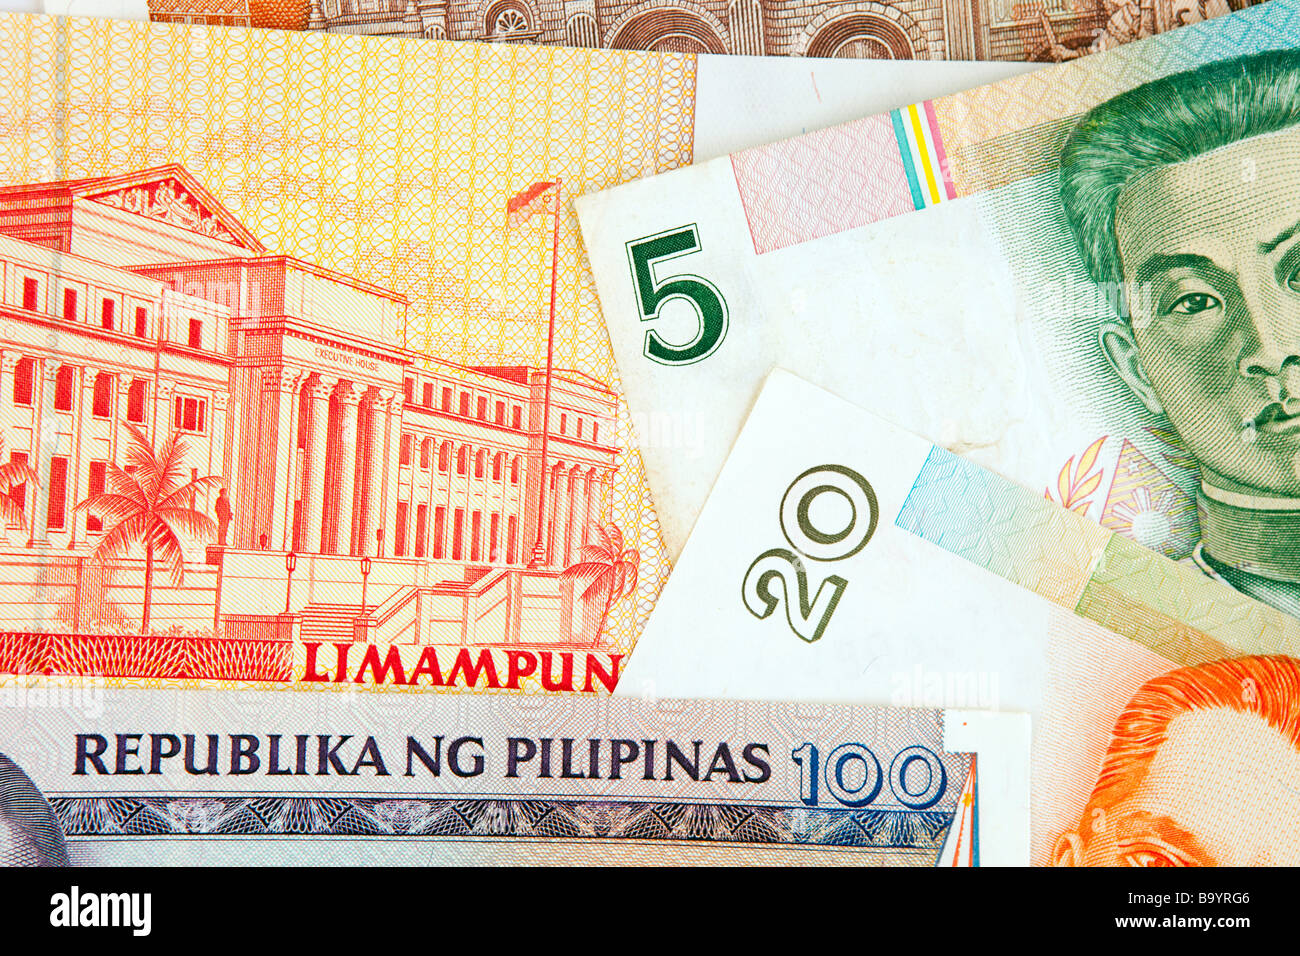 Money currency detail of Philippines banknotes Stock Photo